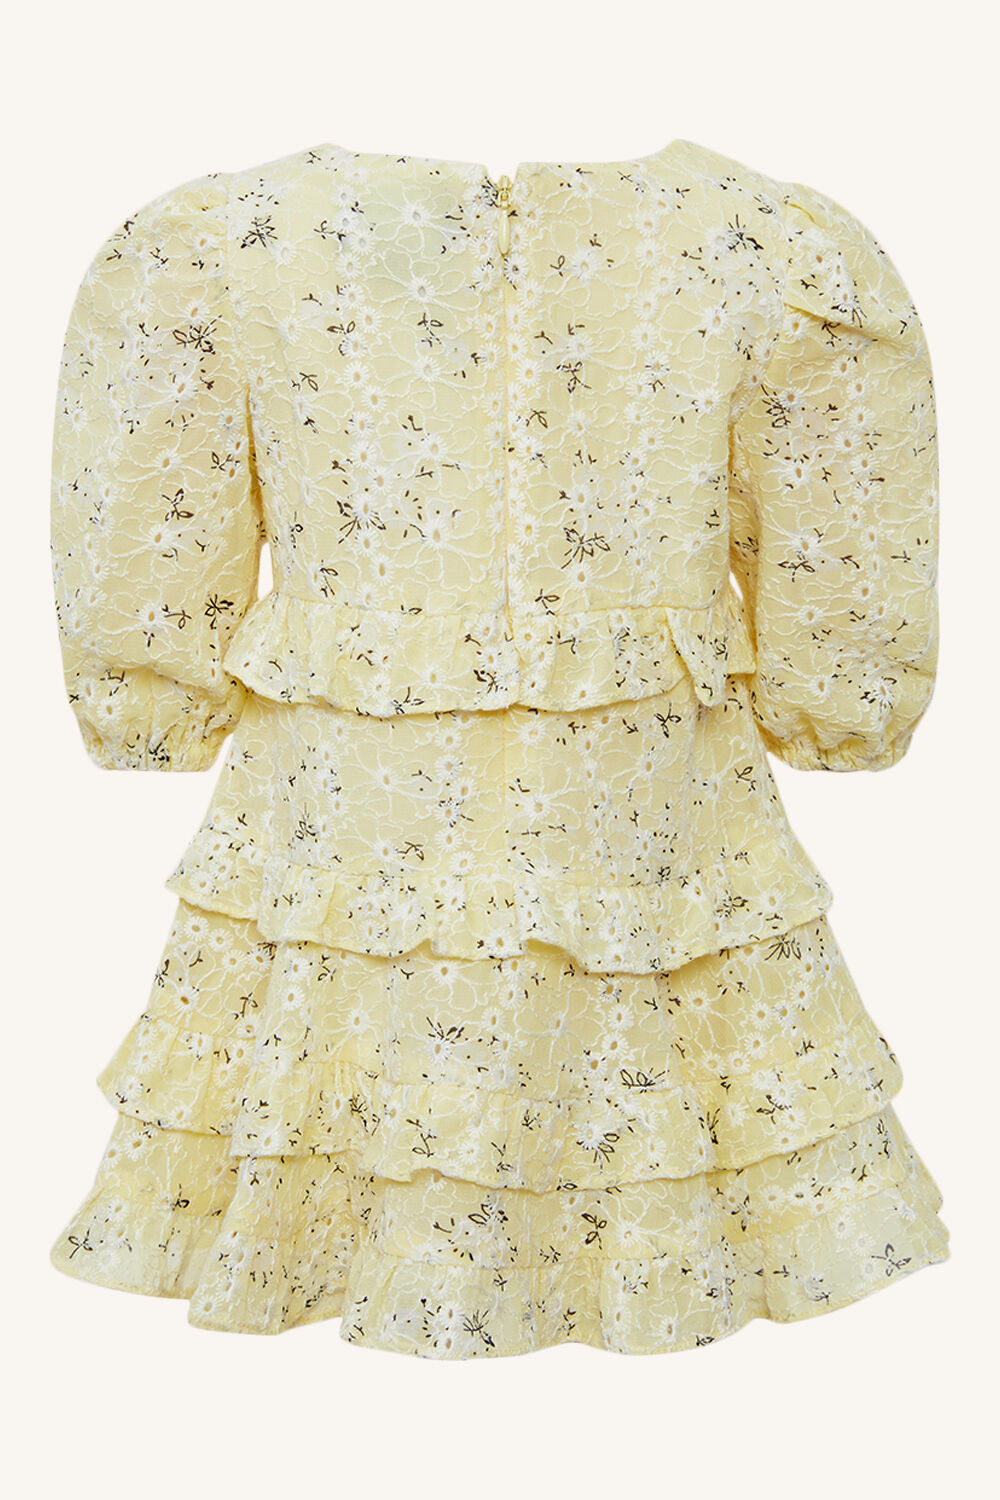 BABY GIRLS HENRI FLORAL DRESS in colour PASTEL YELLOW